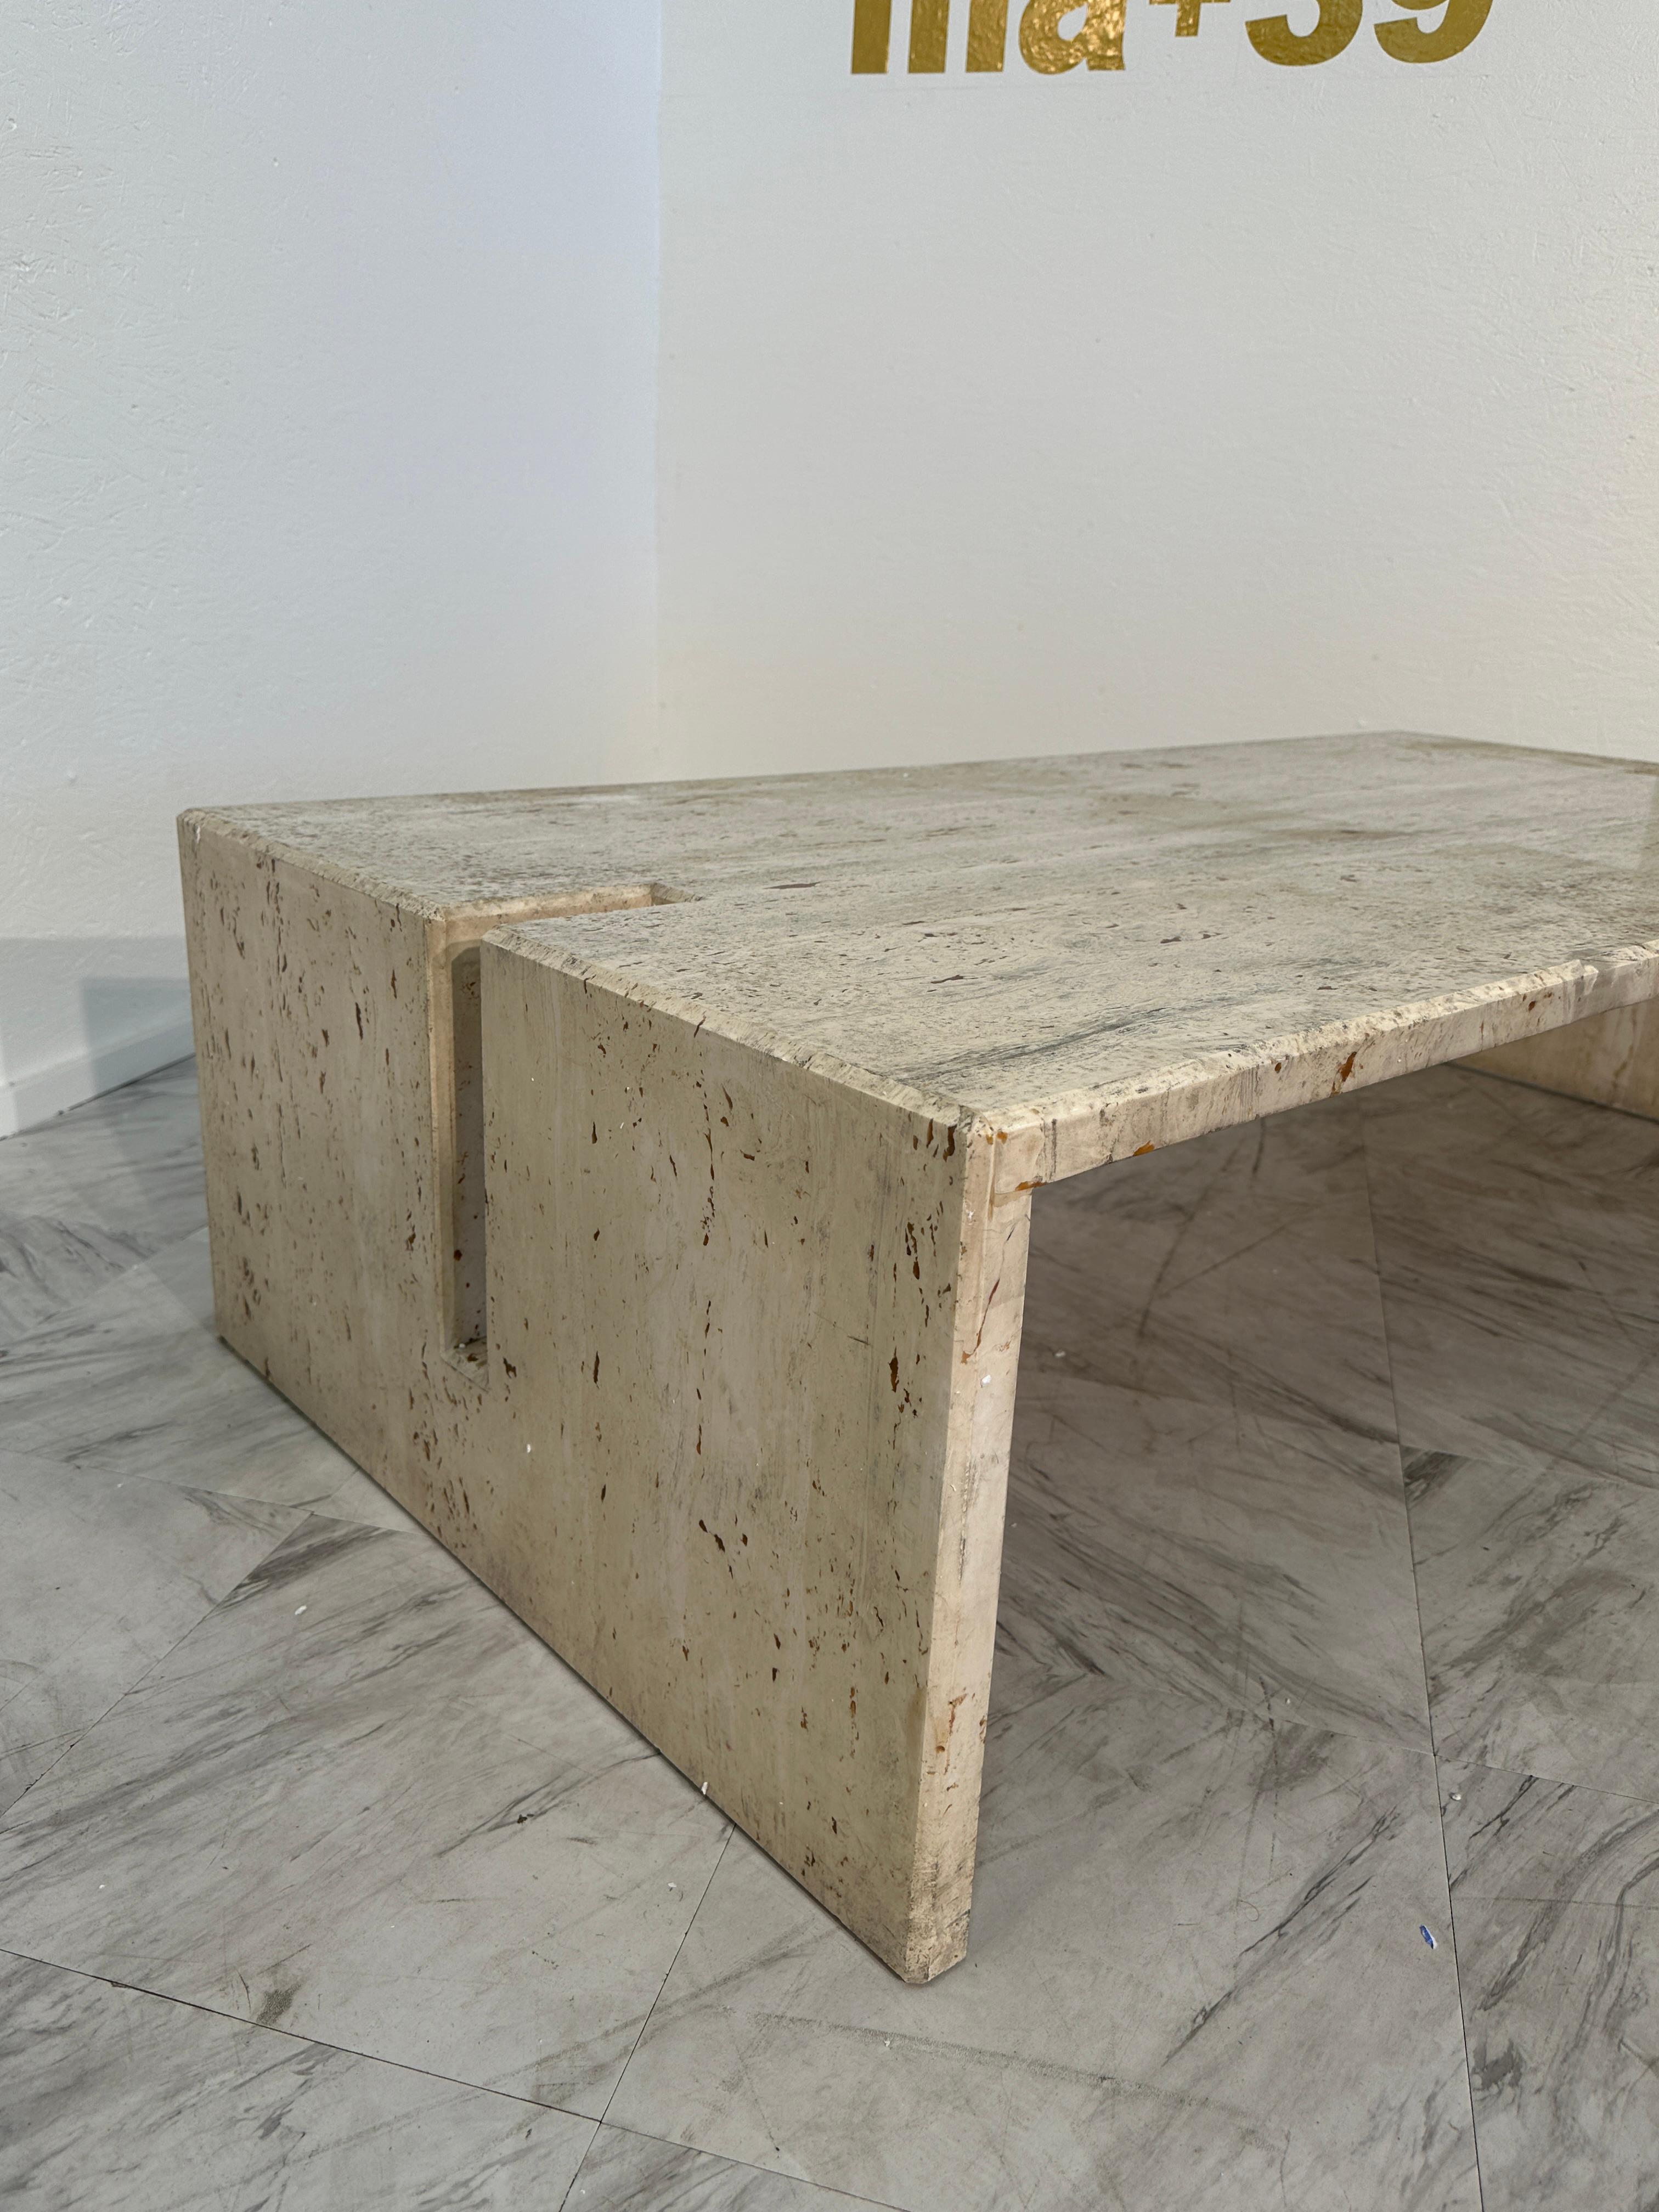 Late 20th Century Mid Century Italian Travertine Coffee Table by Studio A 1970s For Sale